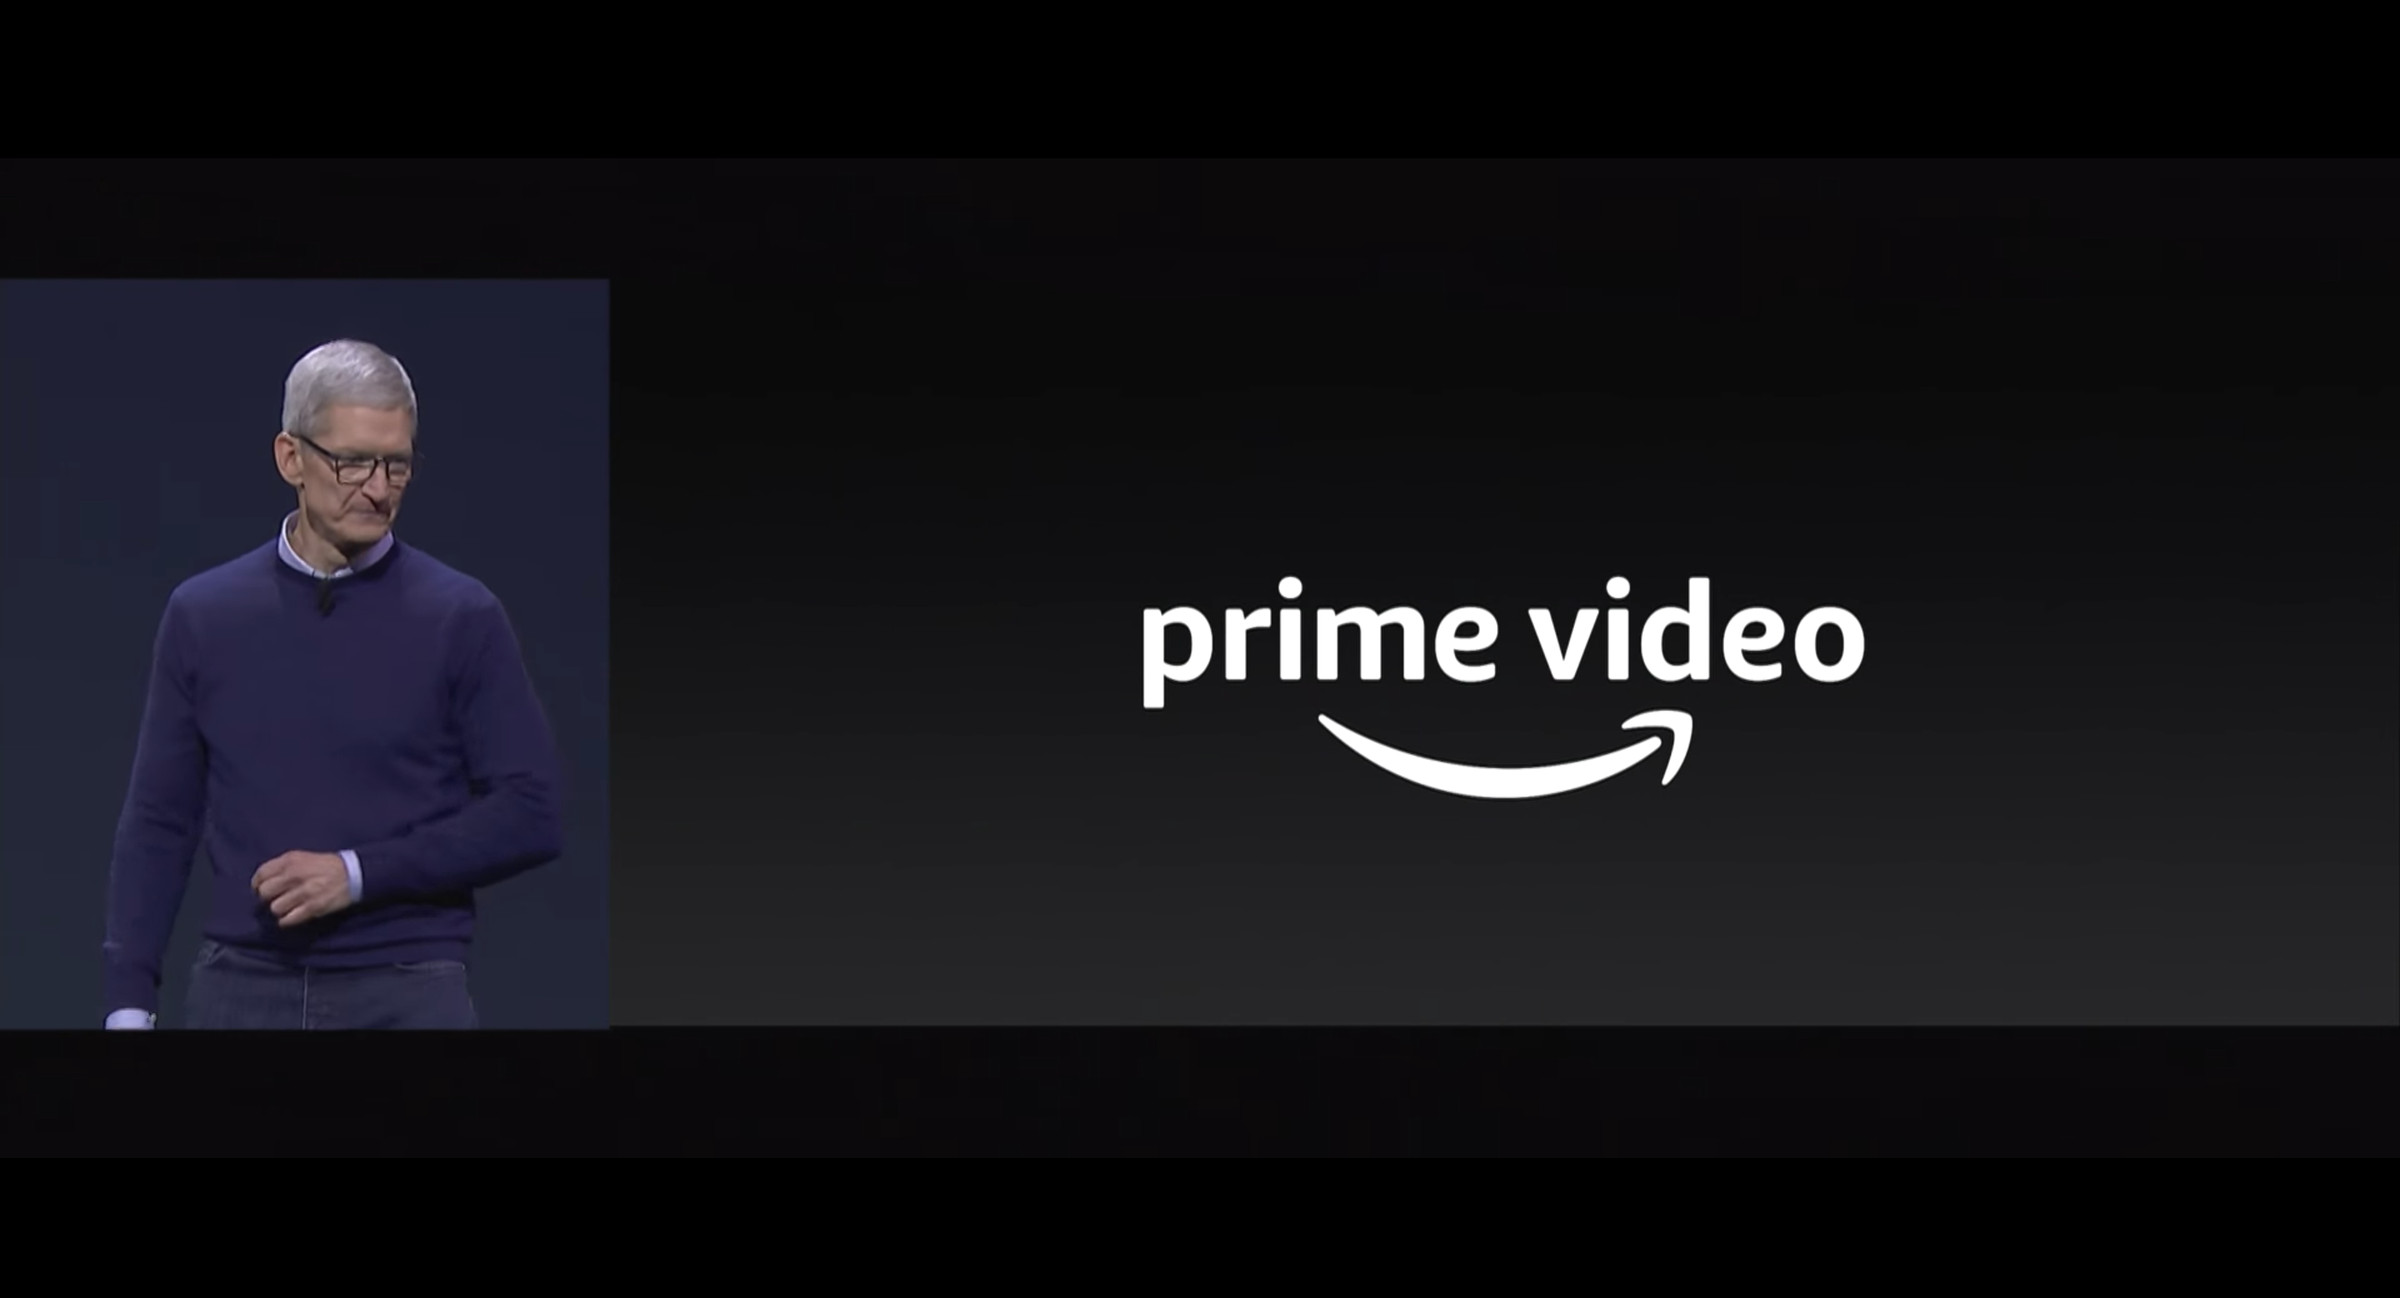 The app would let Apple TV owners natively stream the TV shows and movies that come as part of their Amazon Prime subscription.